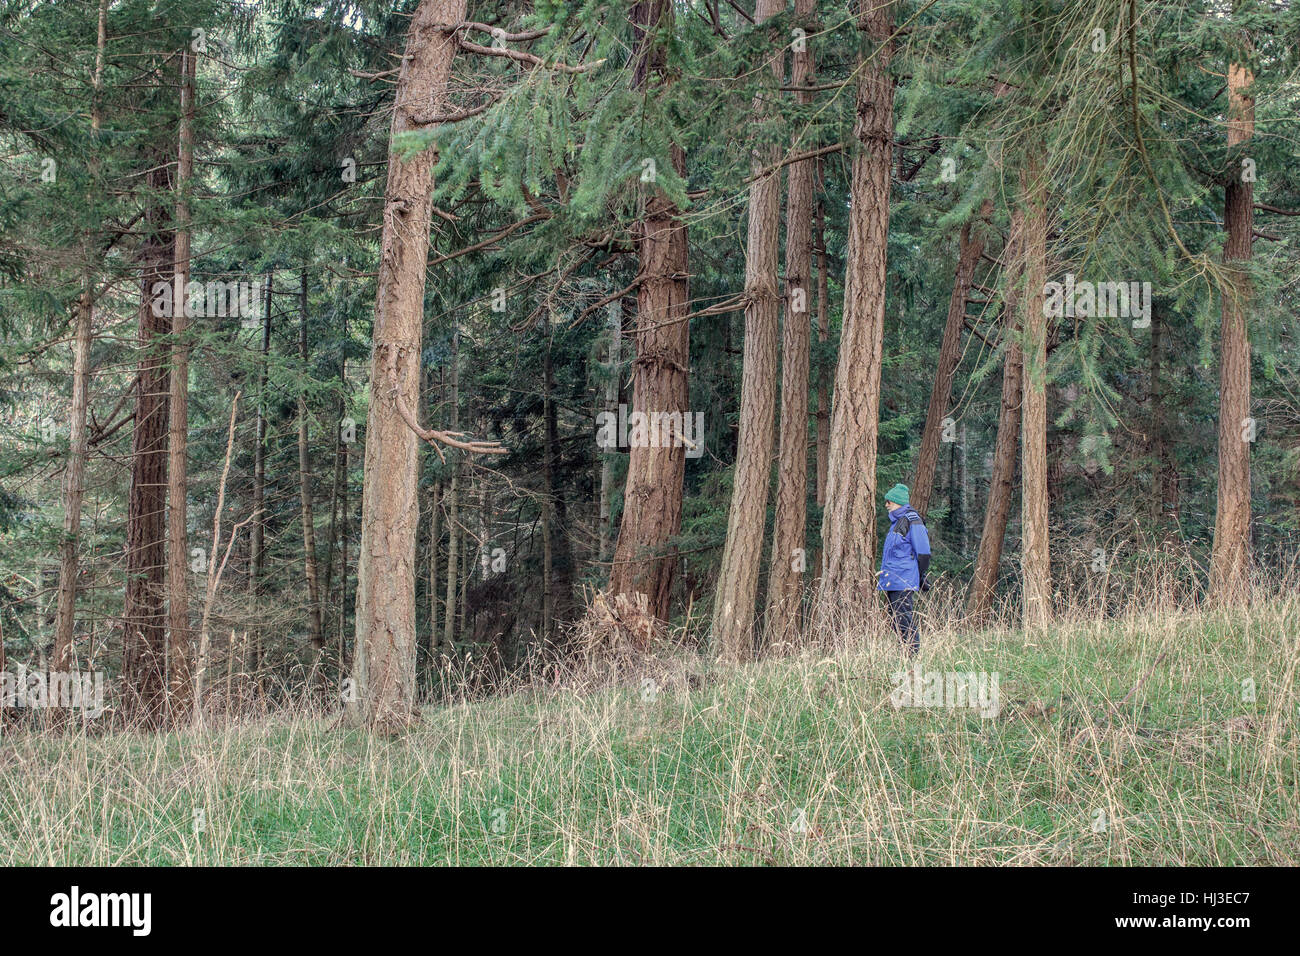 A lone man dressed in blue, age 61, seems tiny standing at the edge of a Douglas fir forest in winter, on Gabriola Island, British Columbia. Stock Photo